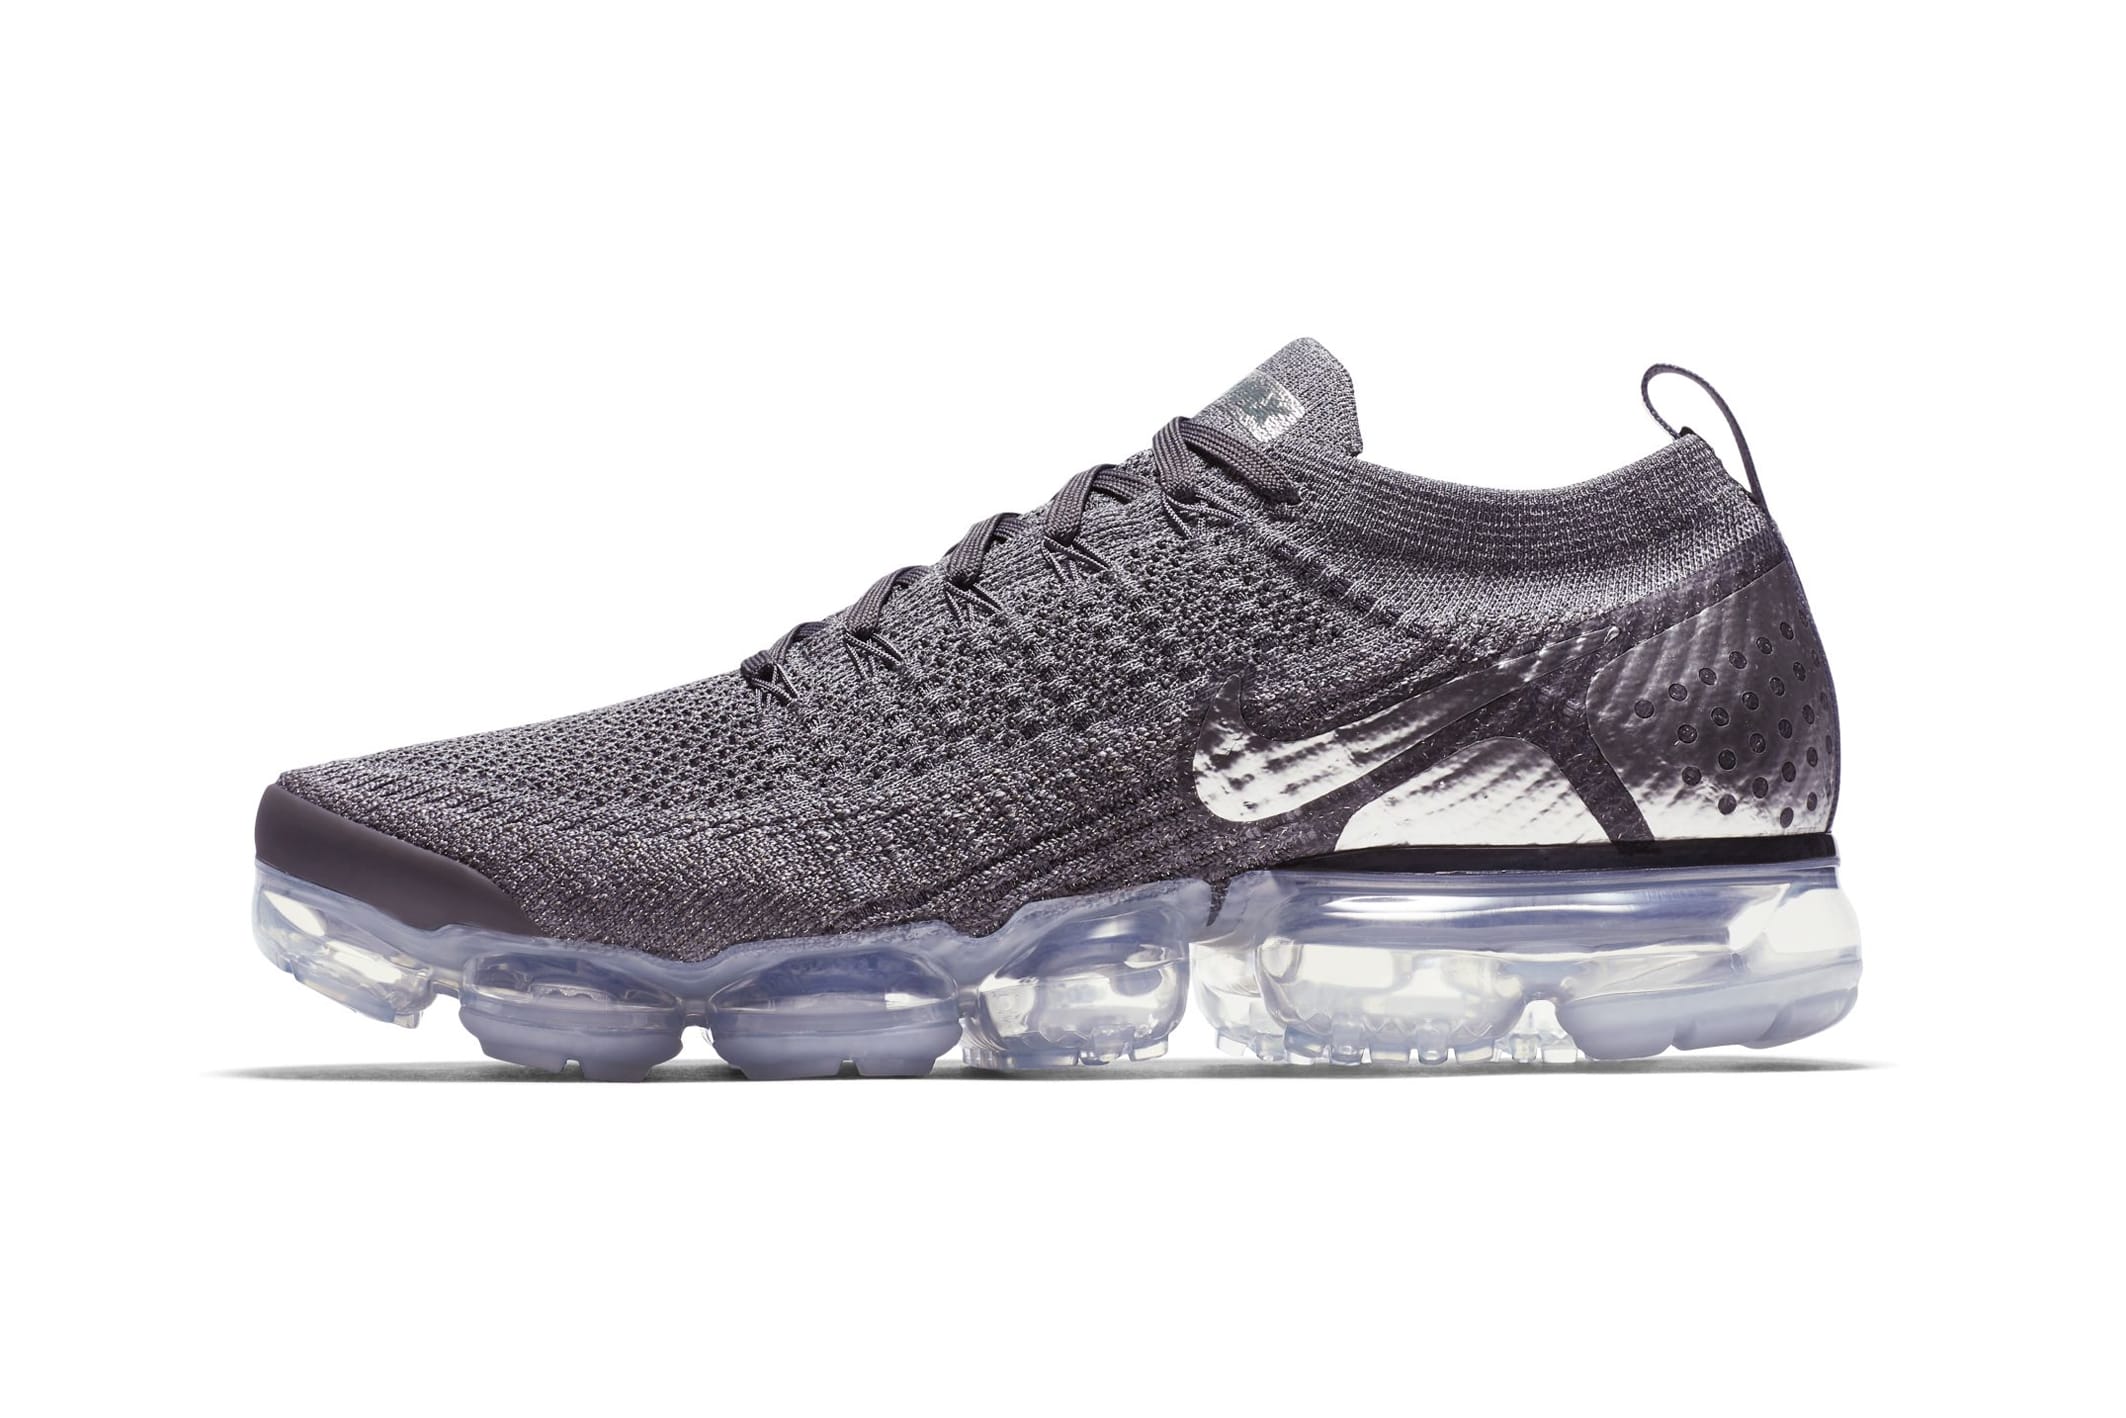 vapormax flyknit limited edition